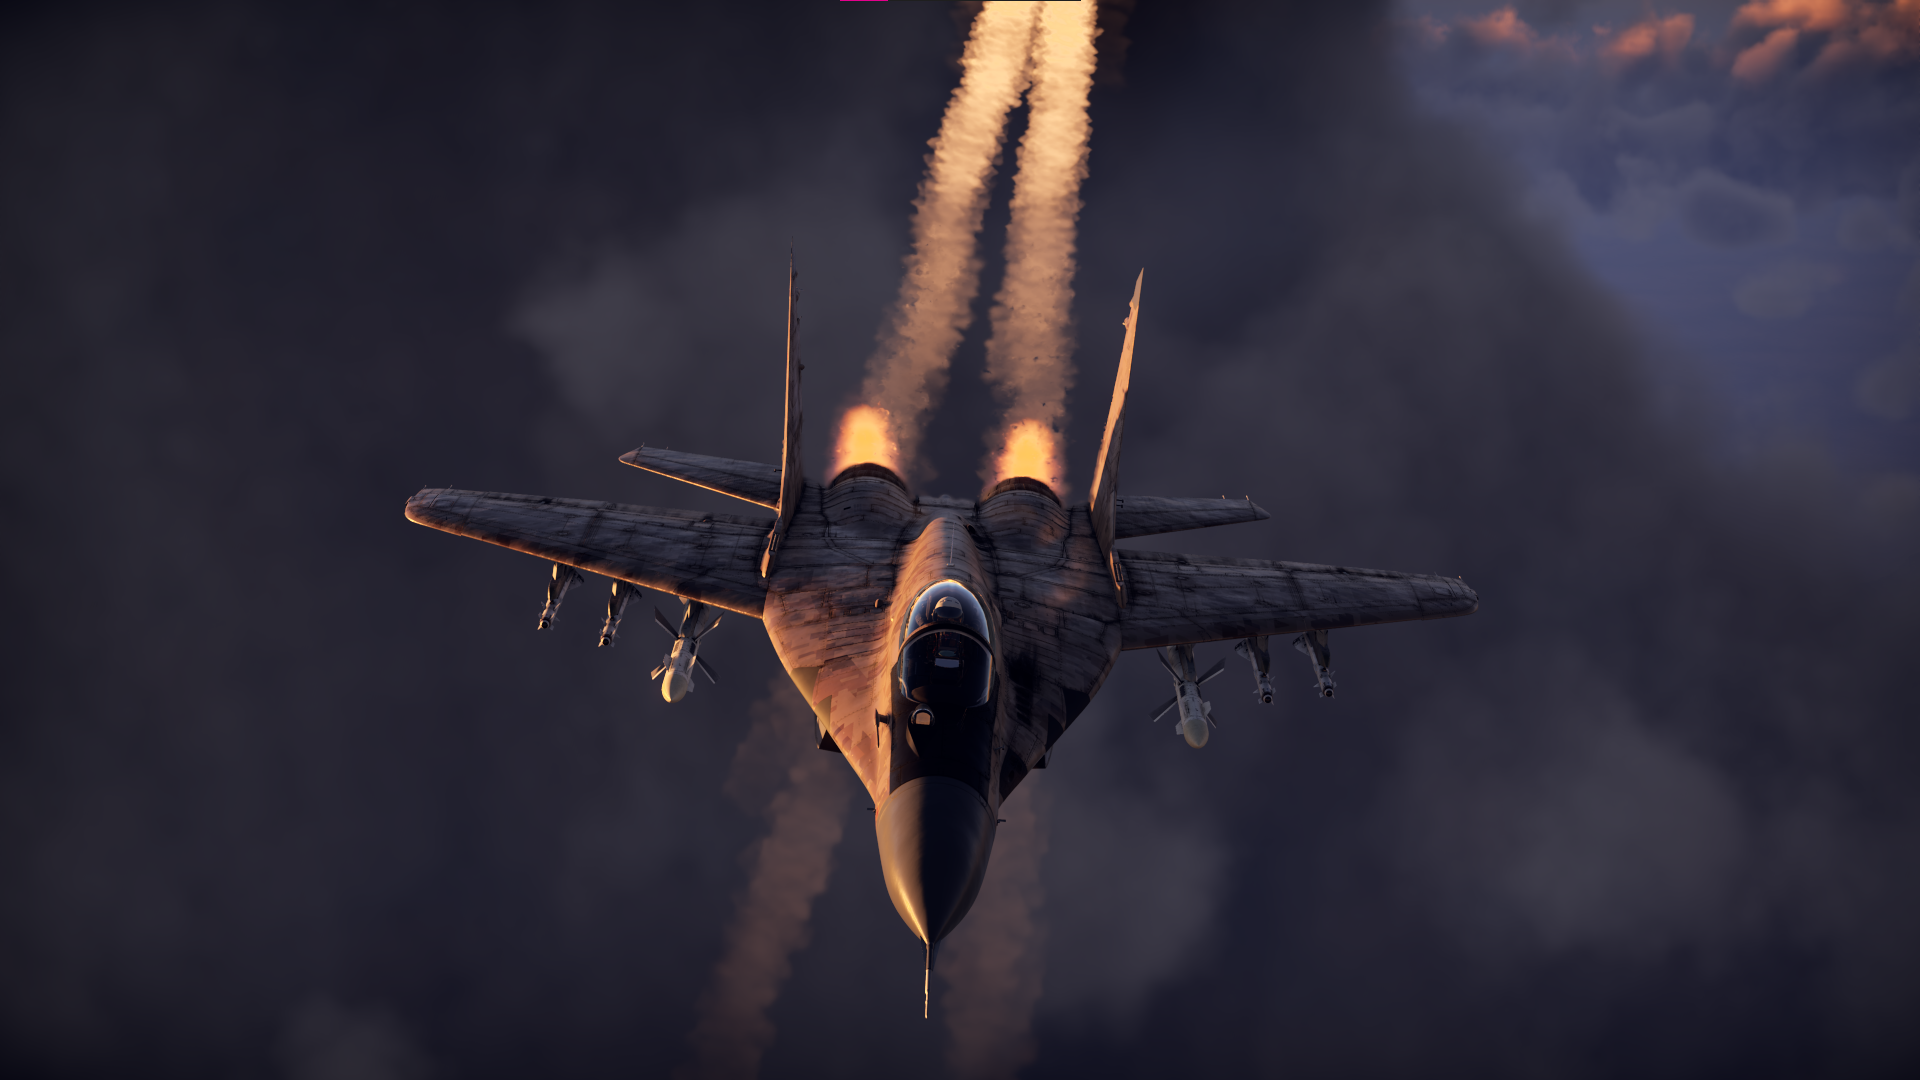 General 1920x1080 War Thunder iraqi air force jet fighter aircraft sky clouds video games CGI Mikoyan MiG-29 screen shot afterburner contrails